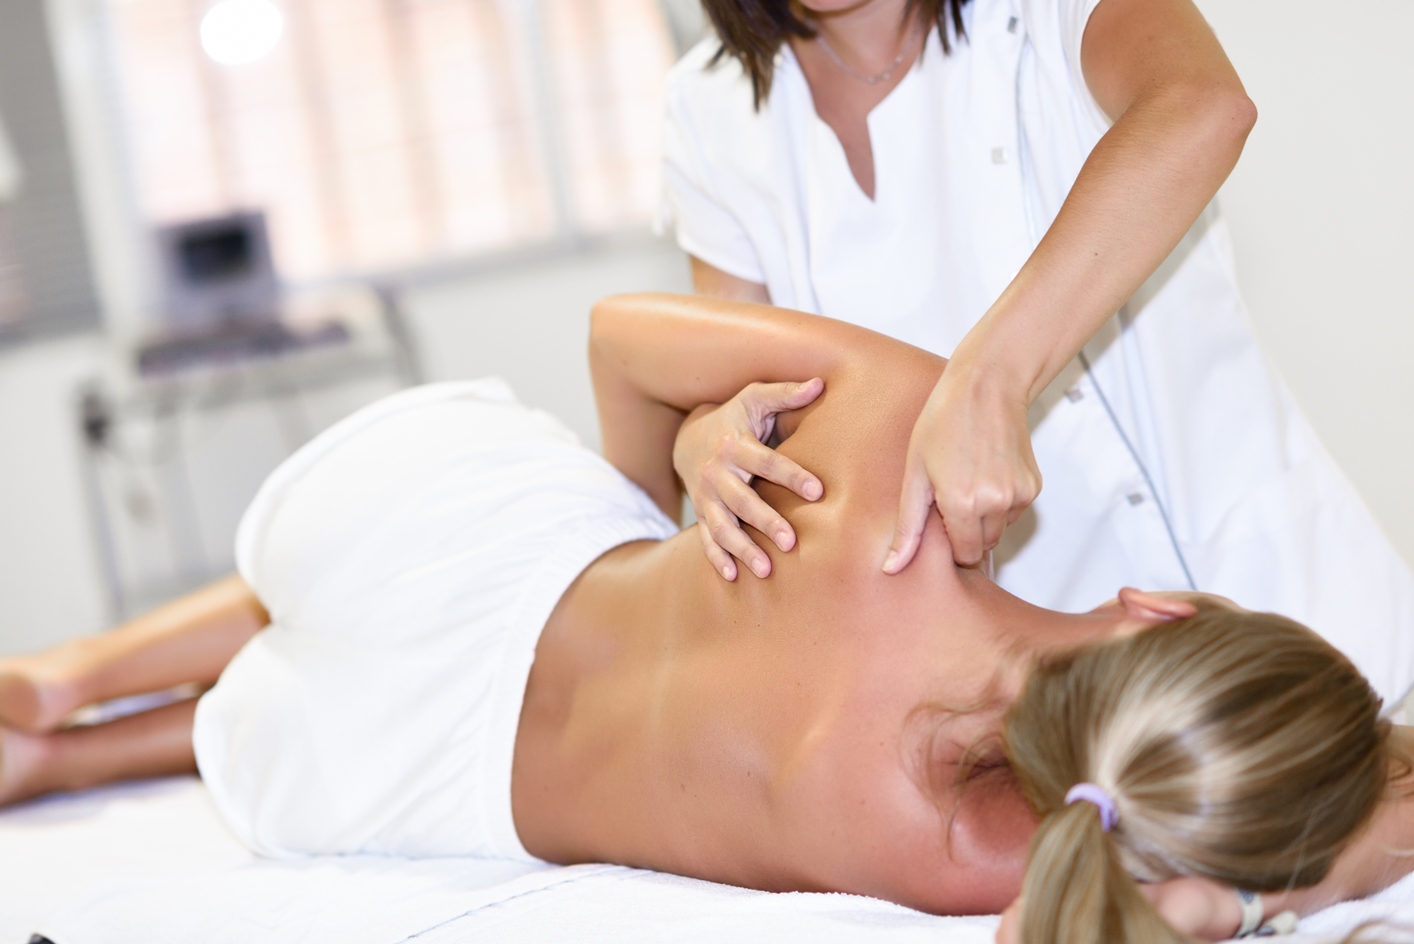 Professional female physiotherapist giving shoulder massage to blonde woman